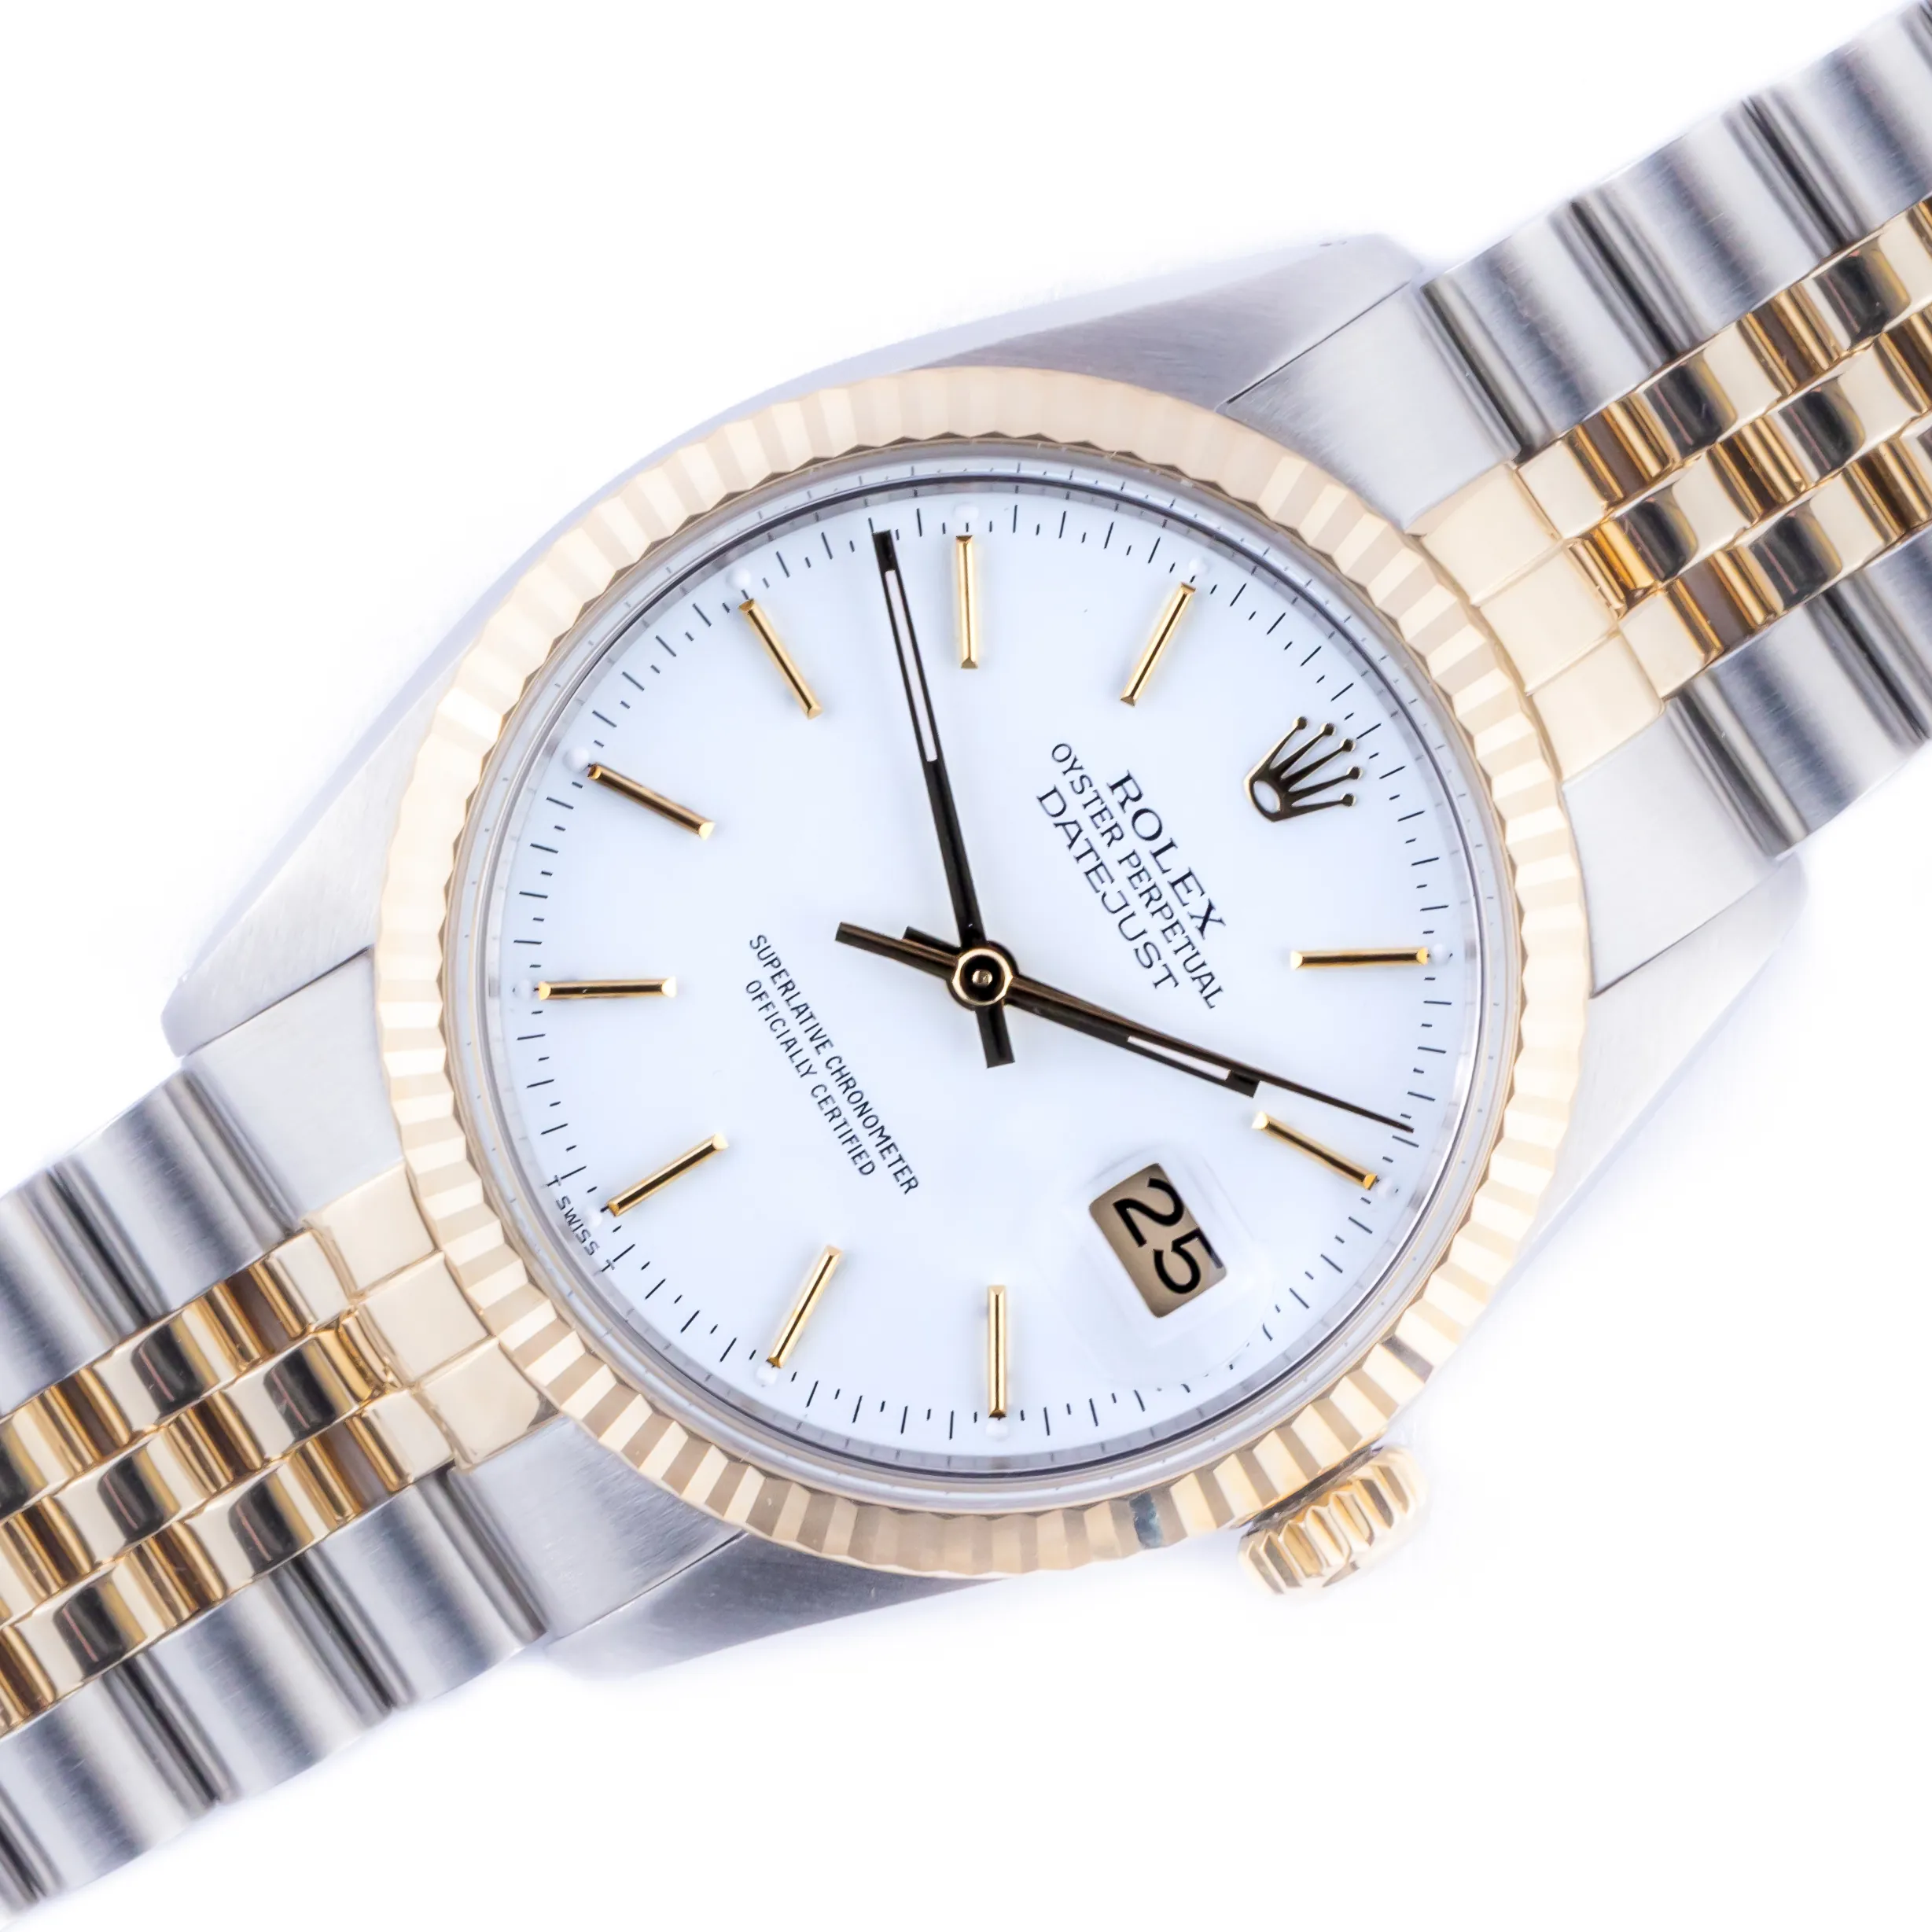 Rolex Oyster Perpetual "Datejust" 16013 36mm Yellow gold and stainless steel White